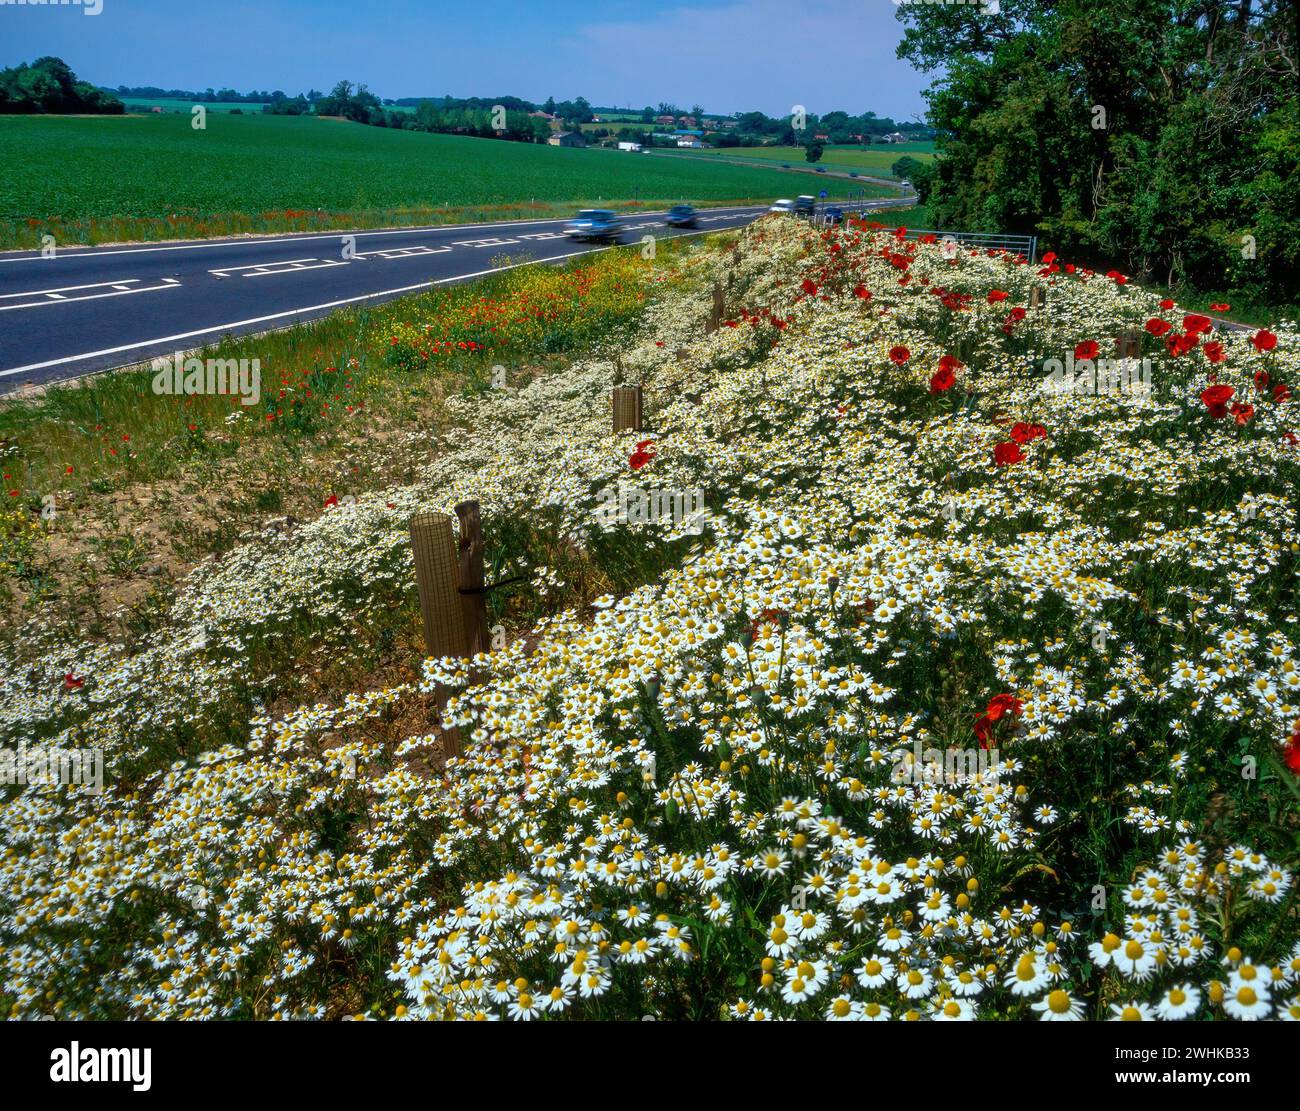 Masses of pretty white daisies and red poppy flowers growing on roadside verge, England, UK Stock Photo